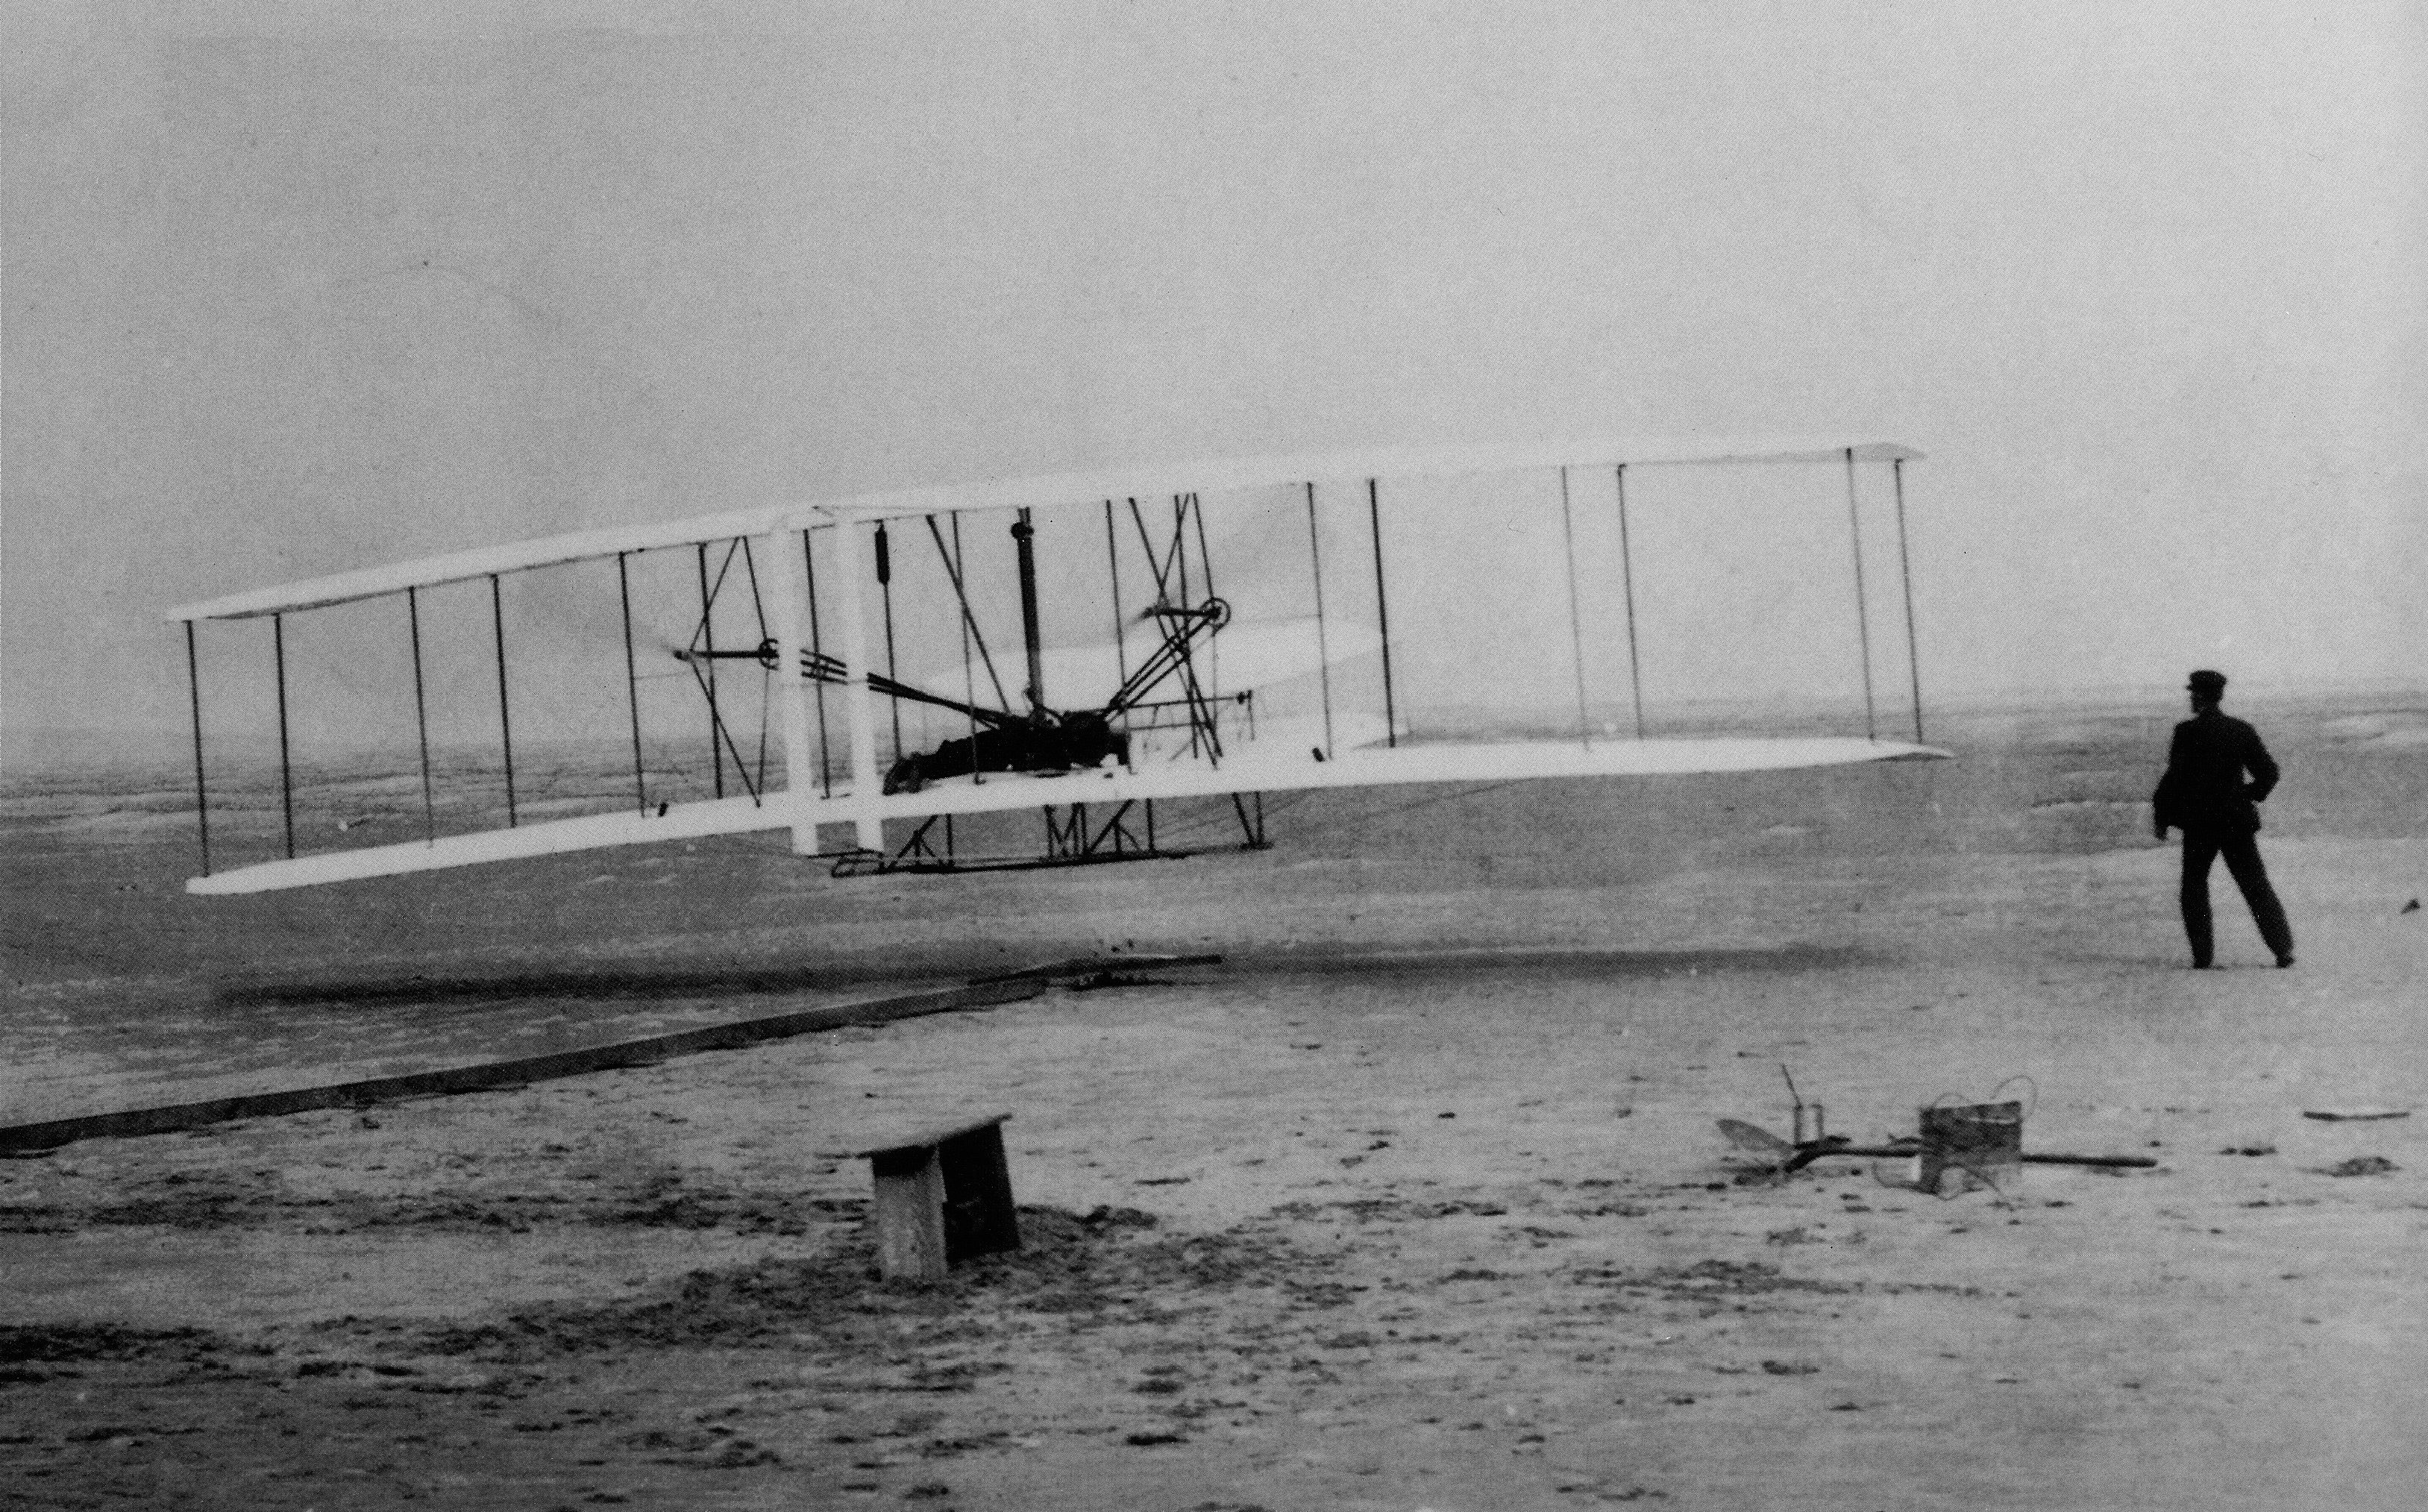 [300 dpi letter-sized (A4) photo (barely compressed 5 MB jpg) of Orville Wright's famous first airplane flight, 1903]